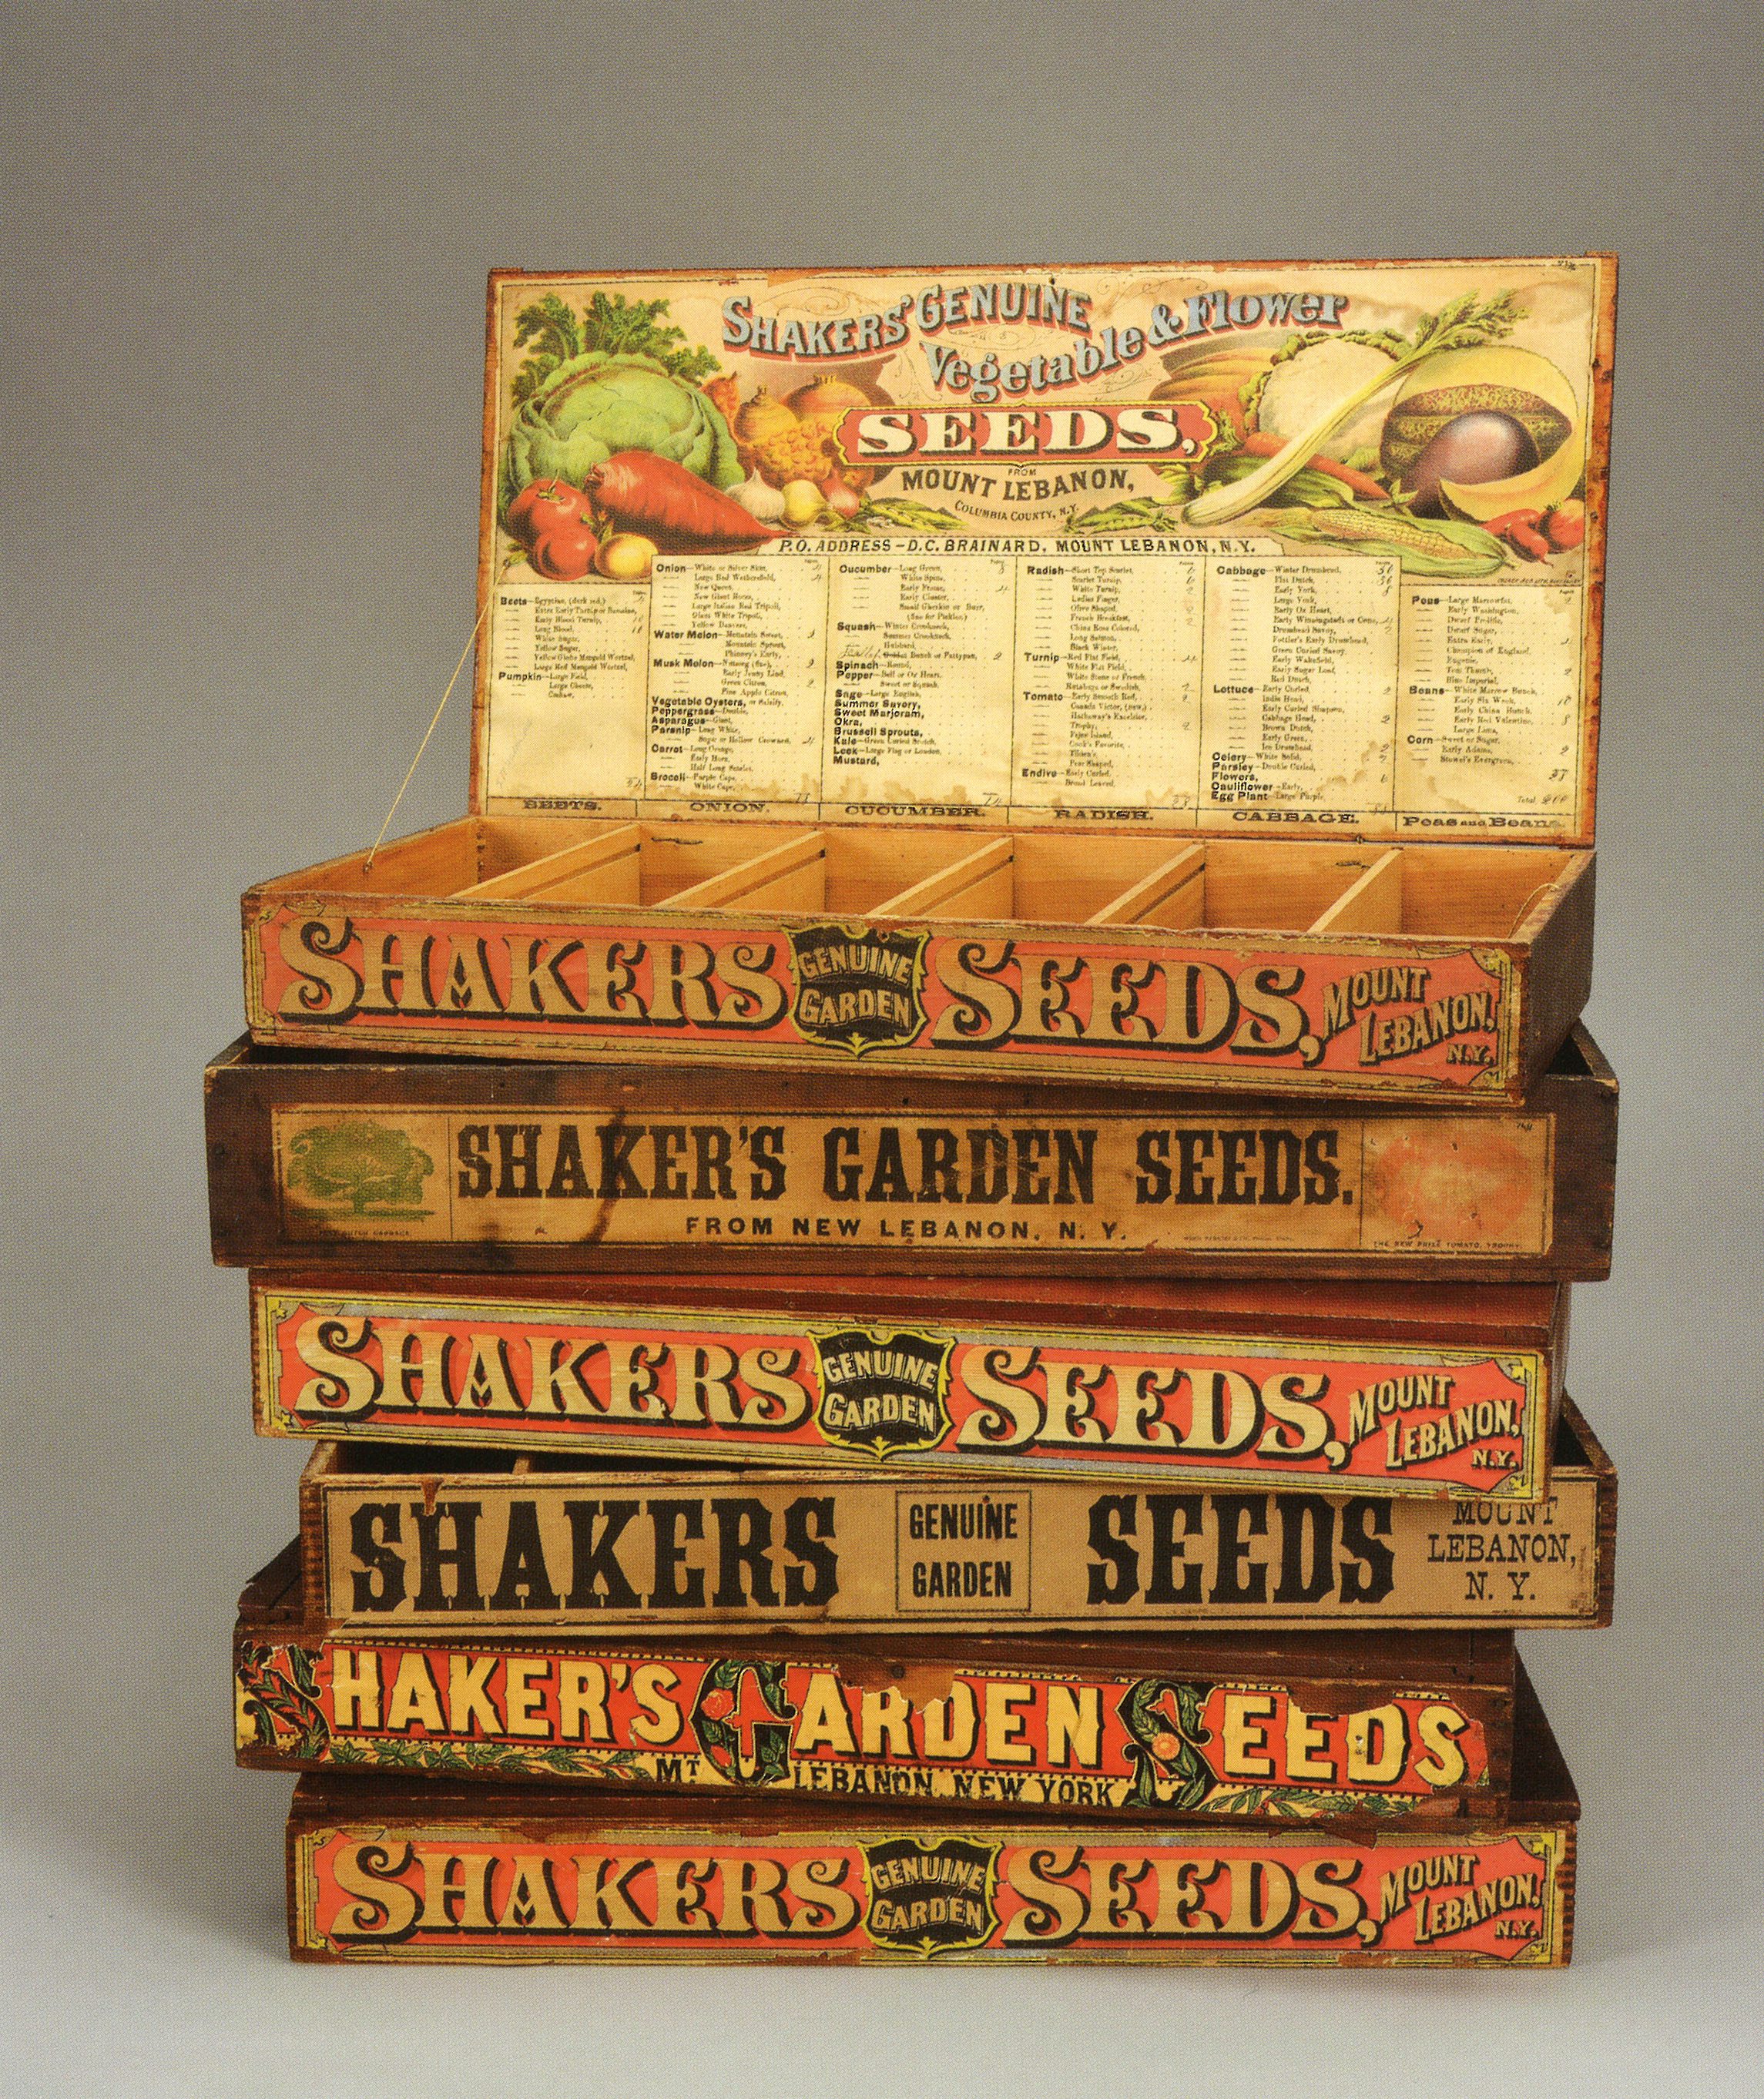 Shakers were hard-working proliferous people. Not only did they invent a variety of products, machines and industrial processes; they also became one of the first name brands in the United States. They were the first to commercialize packaged seeds, which made them well-known across the country. Collection of the Shaker Museum at Mount Lebanon